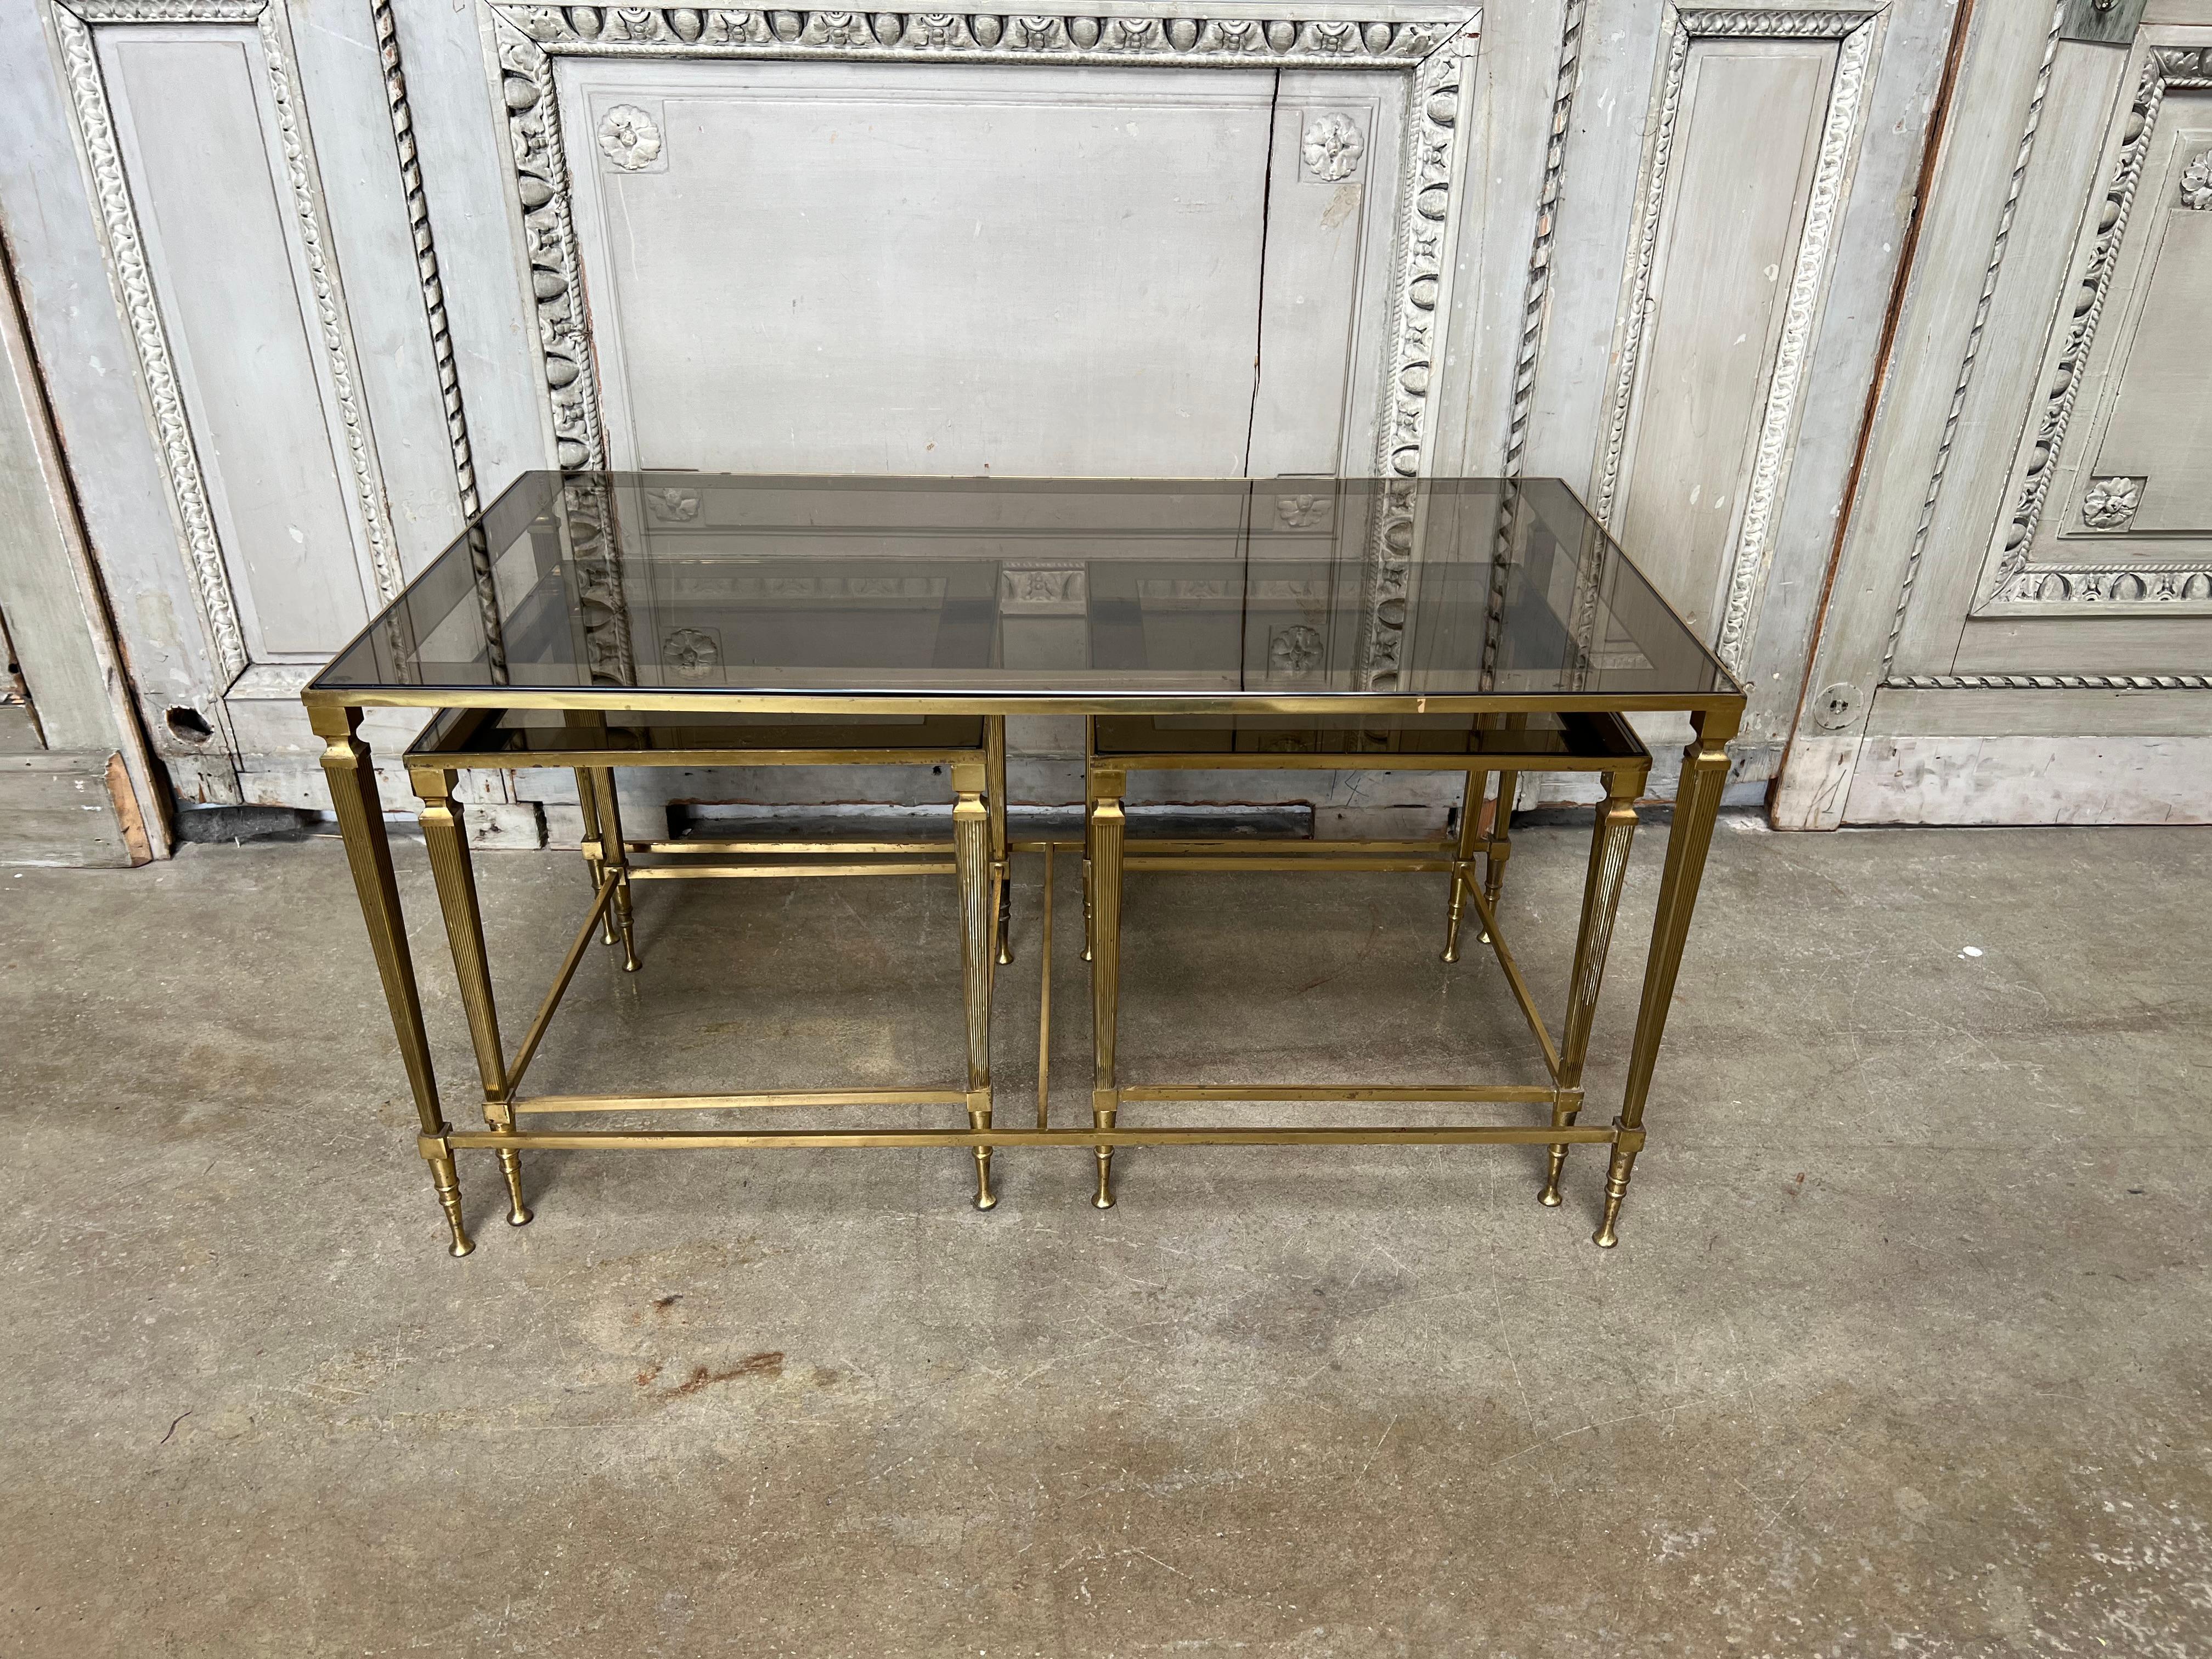 A French mid century three piece brass and glass cocktail-coffee table set with mirrored band on the smoked glass. This charming suite of tables is very useful with the two smaller tables tucking under the larger one to be pulled out when needed.